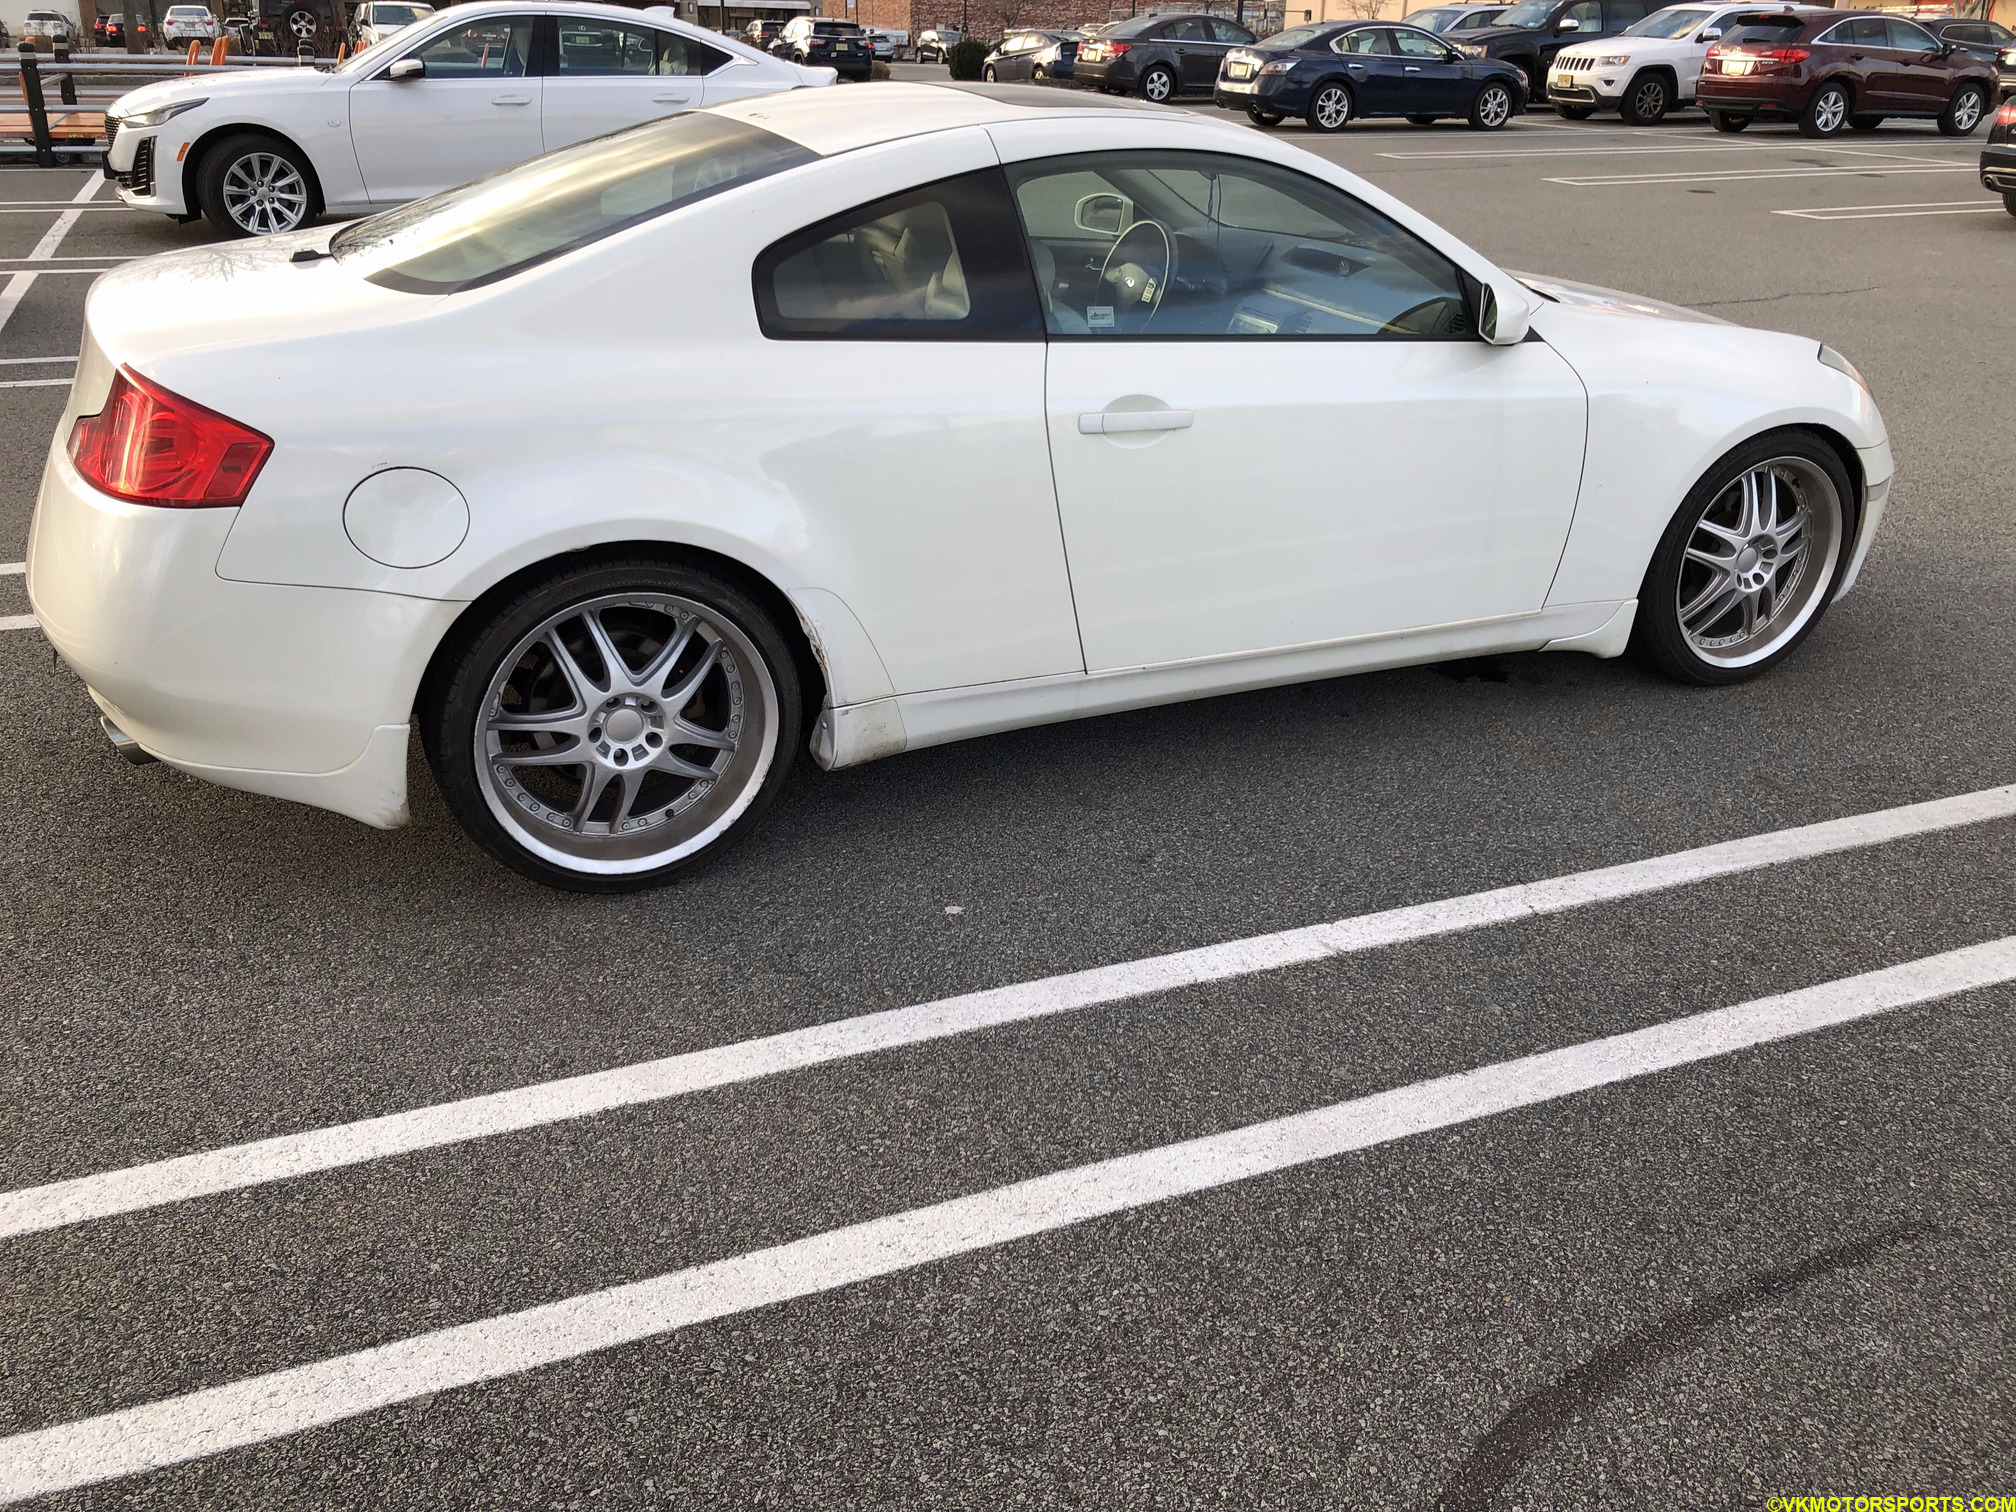 Figure 1. G35 with 20 inch wheels and no tint